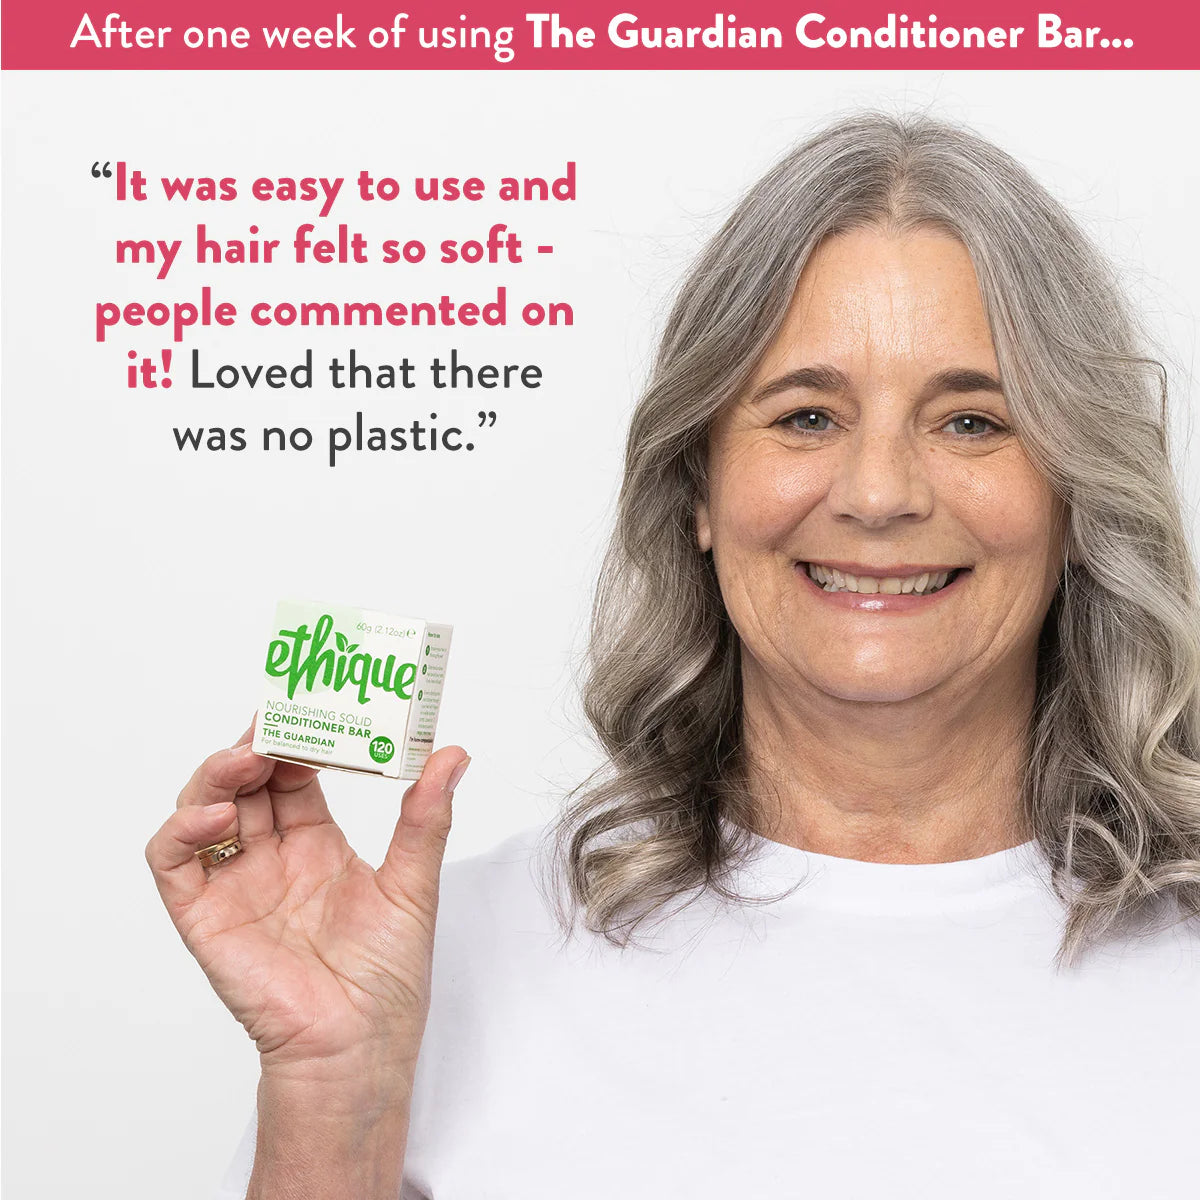 Ethique Nourishing Conditioner Bar for Dry Hair: The Guardian-The Living Co.